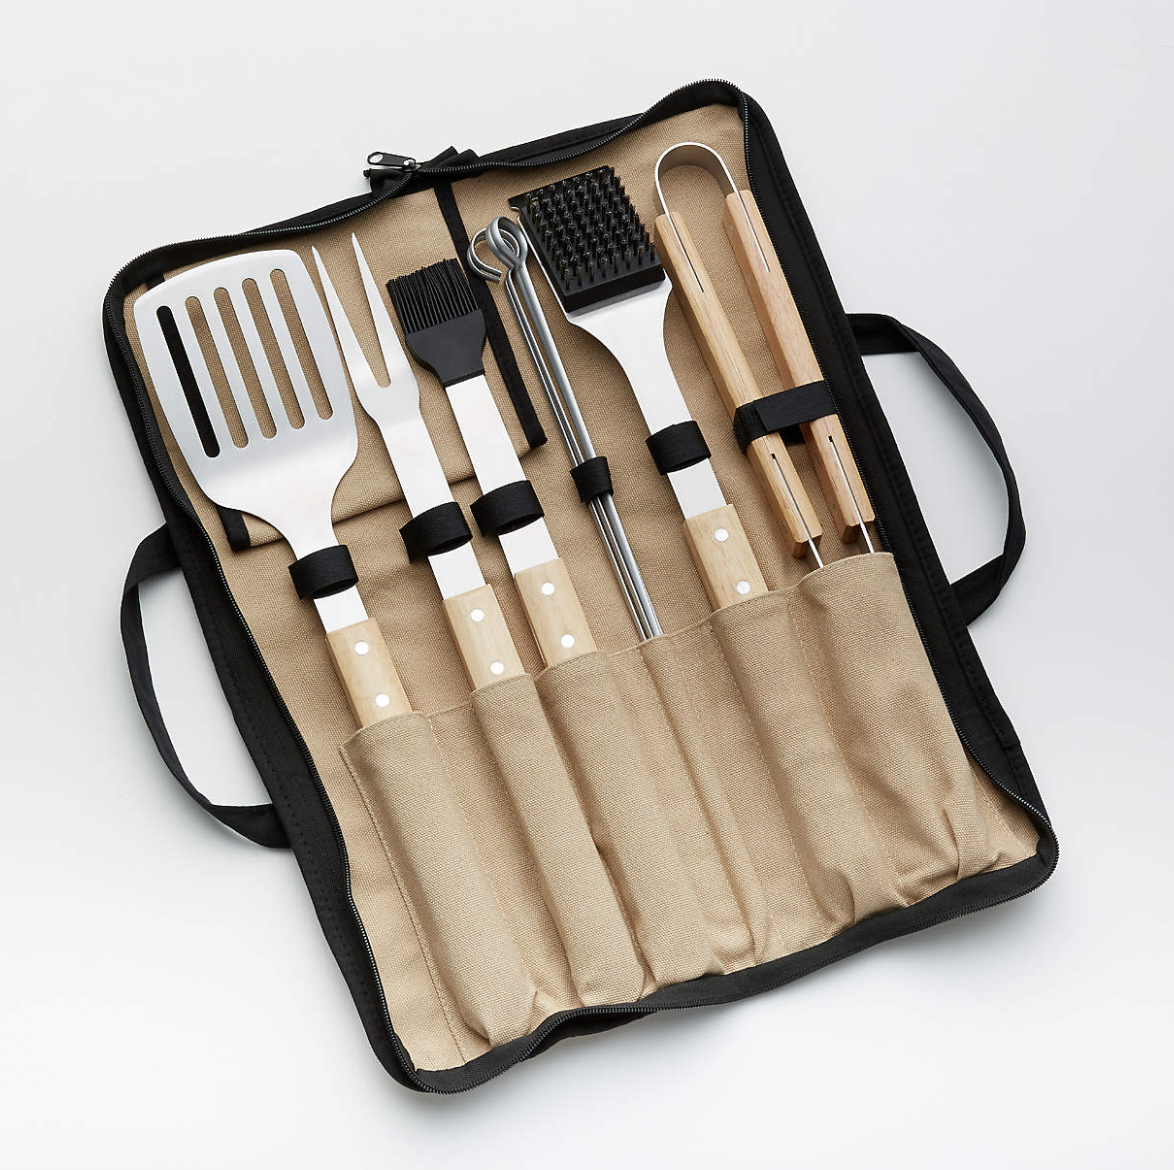 Crate and Barrell BBQ Tool Set